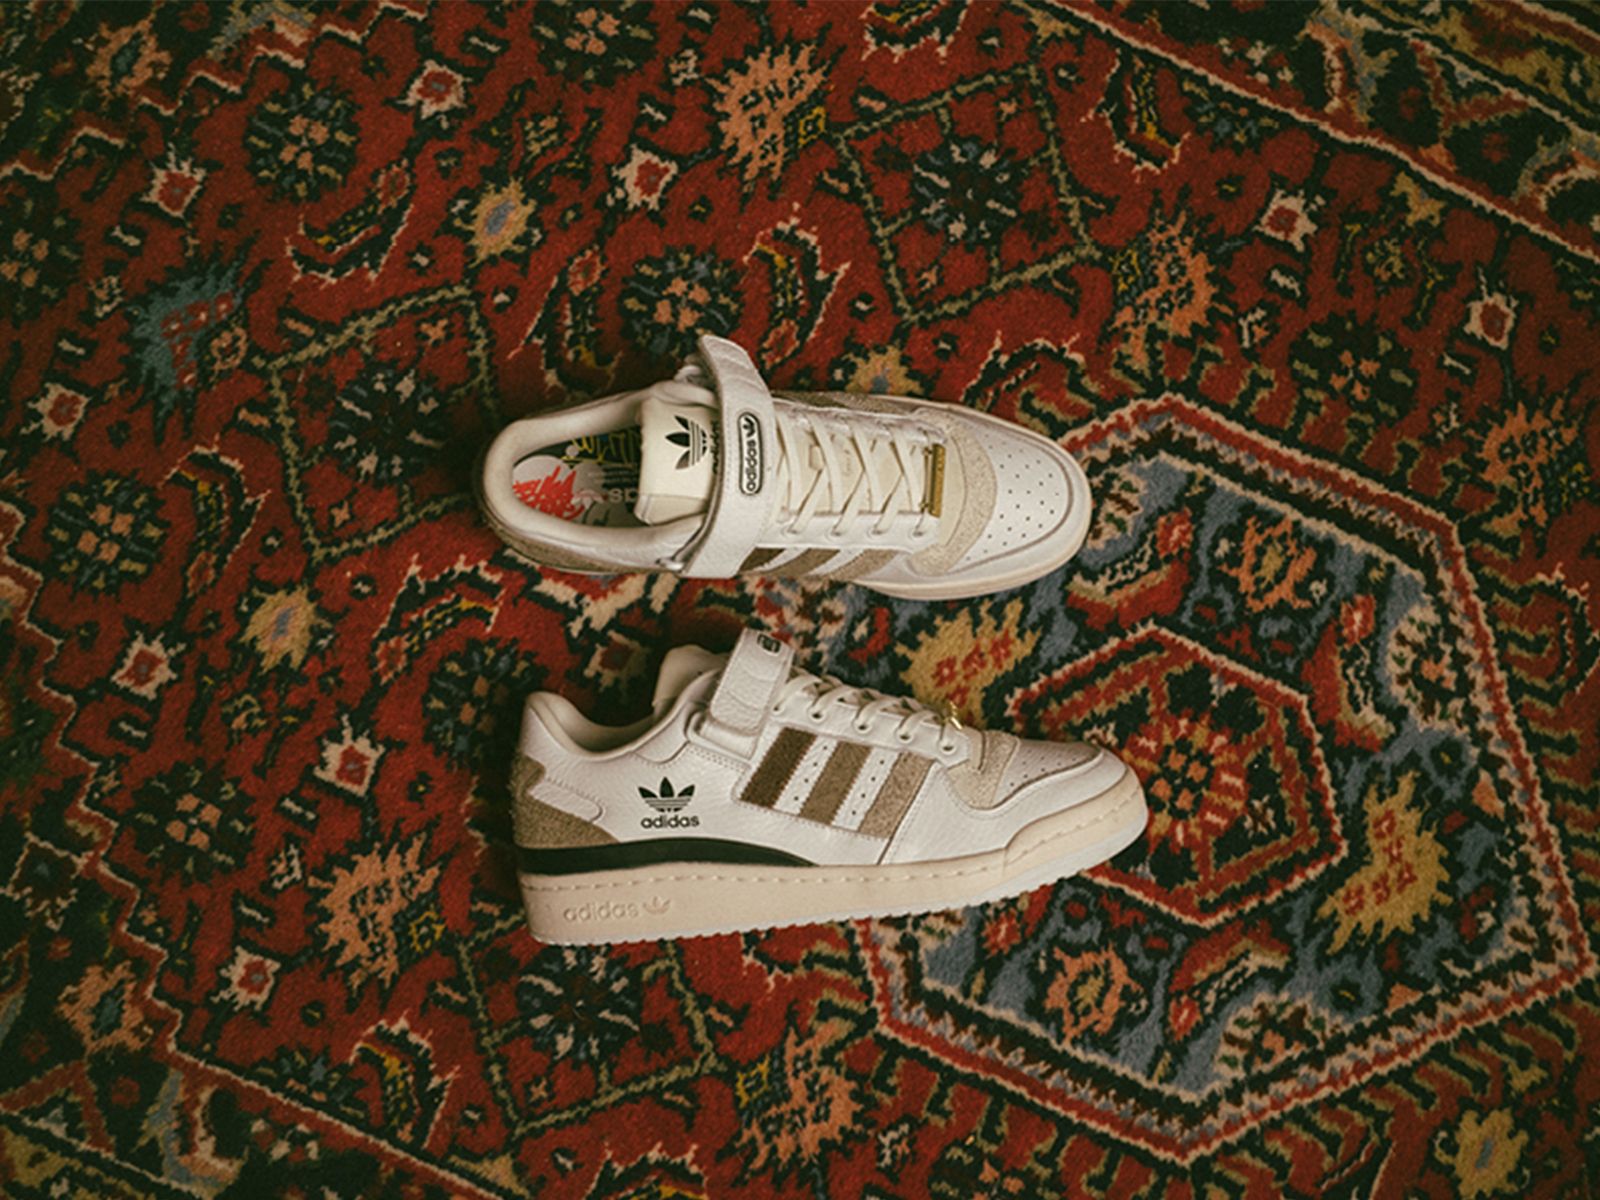 SNIPES x adidas honor fashion capitals with a unique Forum Low silhouette